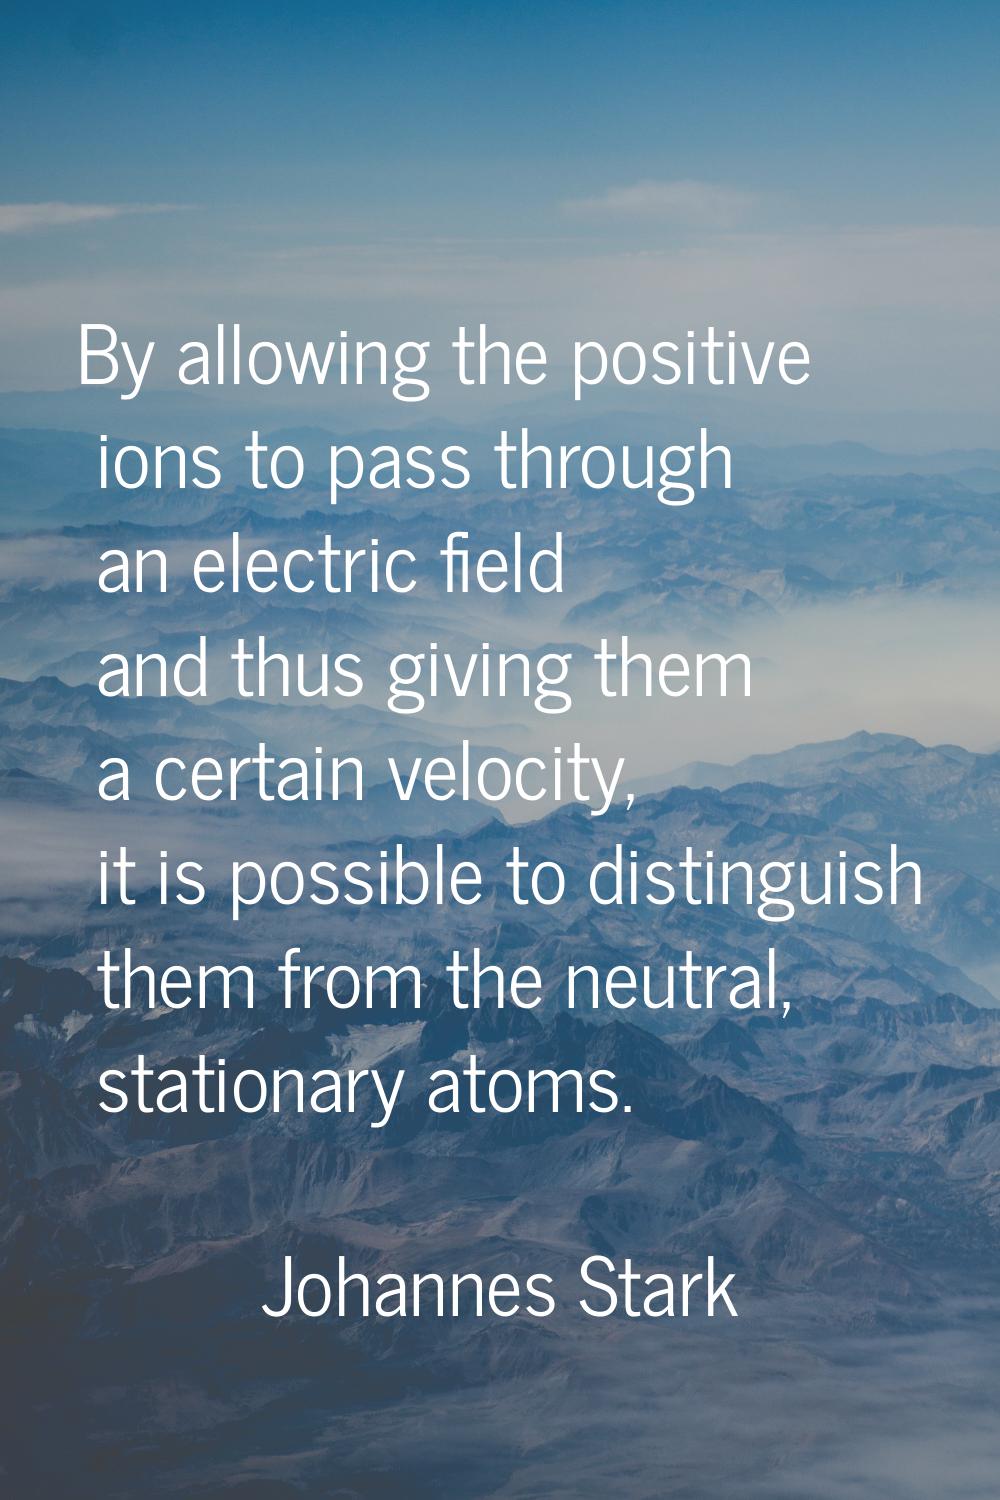 By allowing the positive ions to pass through an electric field and thus giving them a certain velo